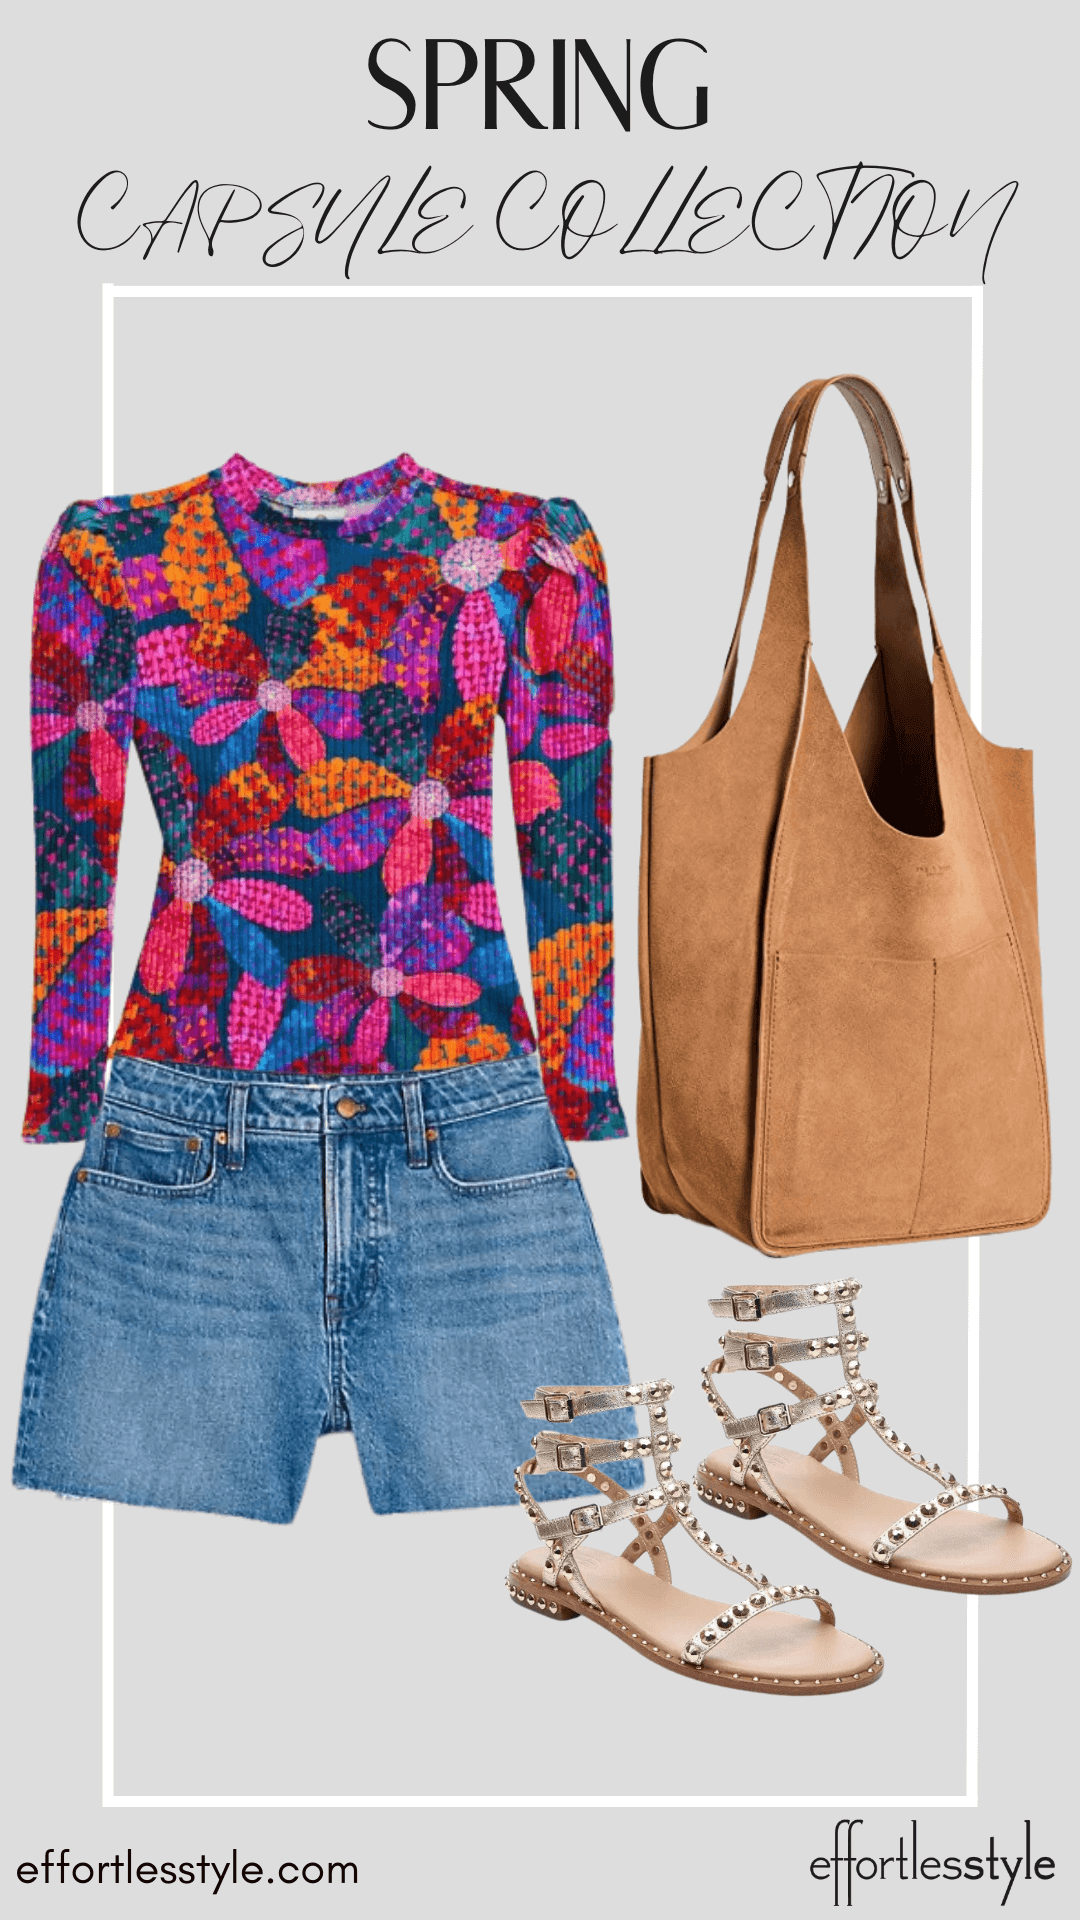 How To Wear Our Spring Capsule Wardrobe - Part 1 Printed Bodysuit & Denim Shorts how to style your denim shorts for early spring how to wear color this spring how to style bright colors this spring